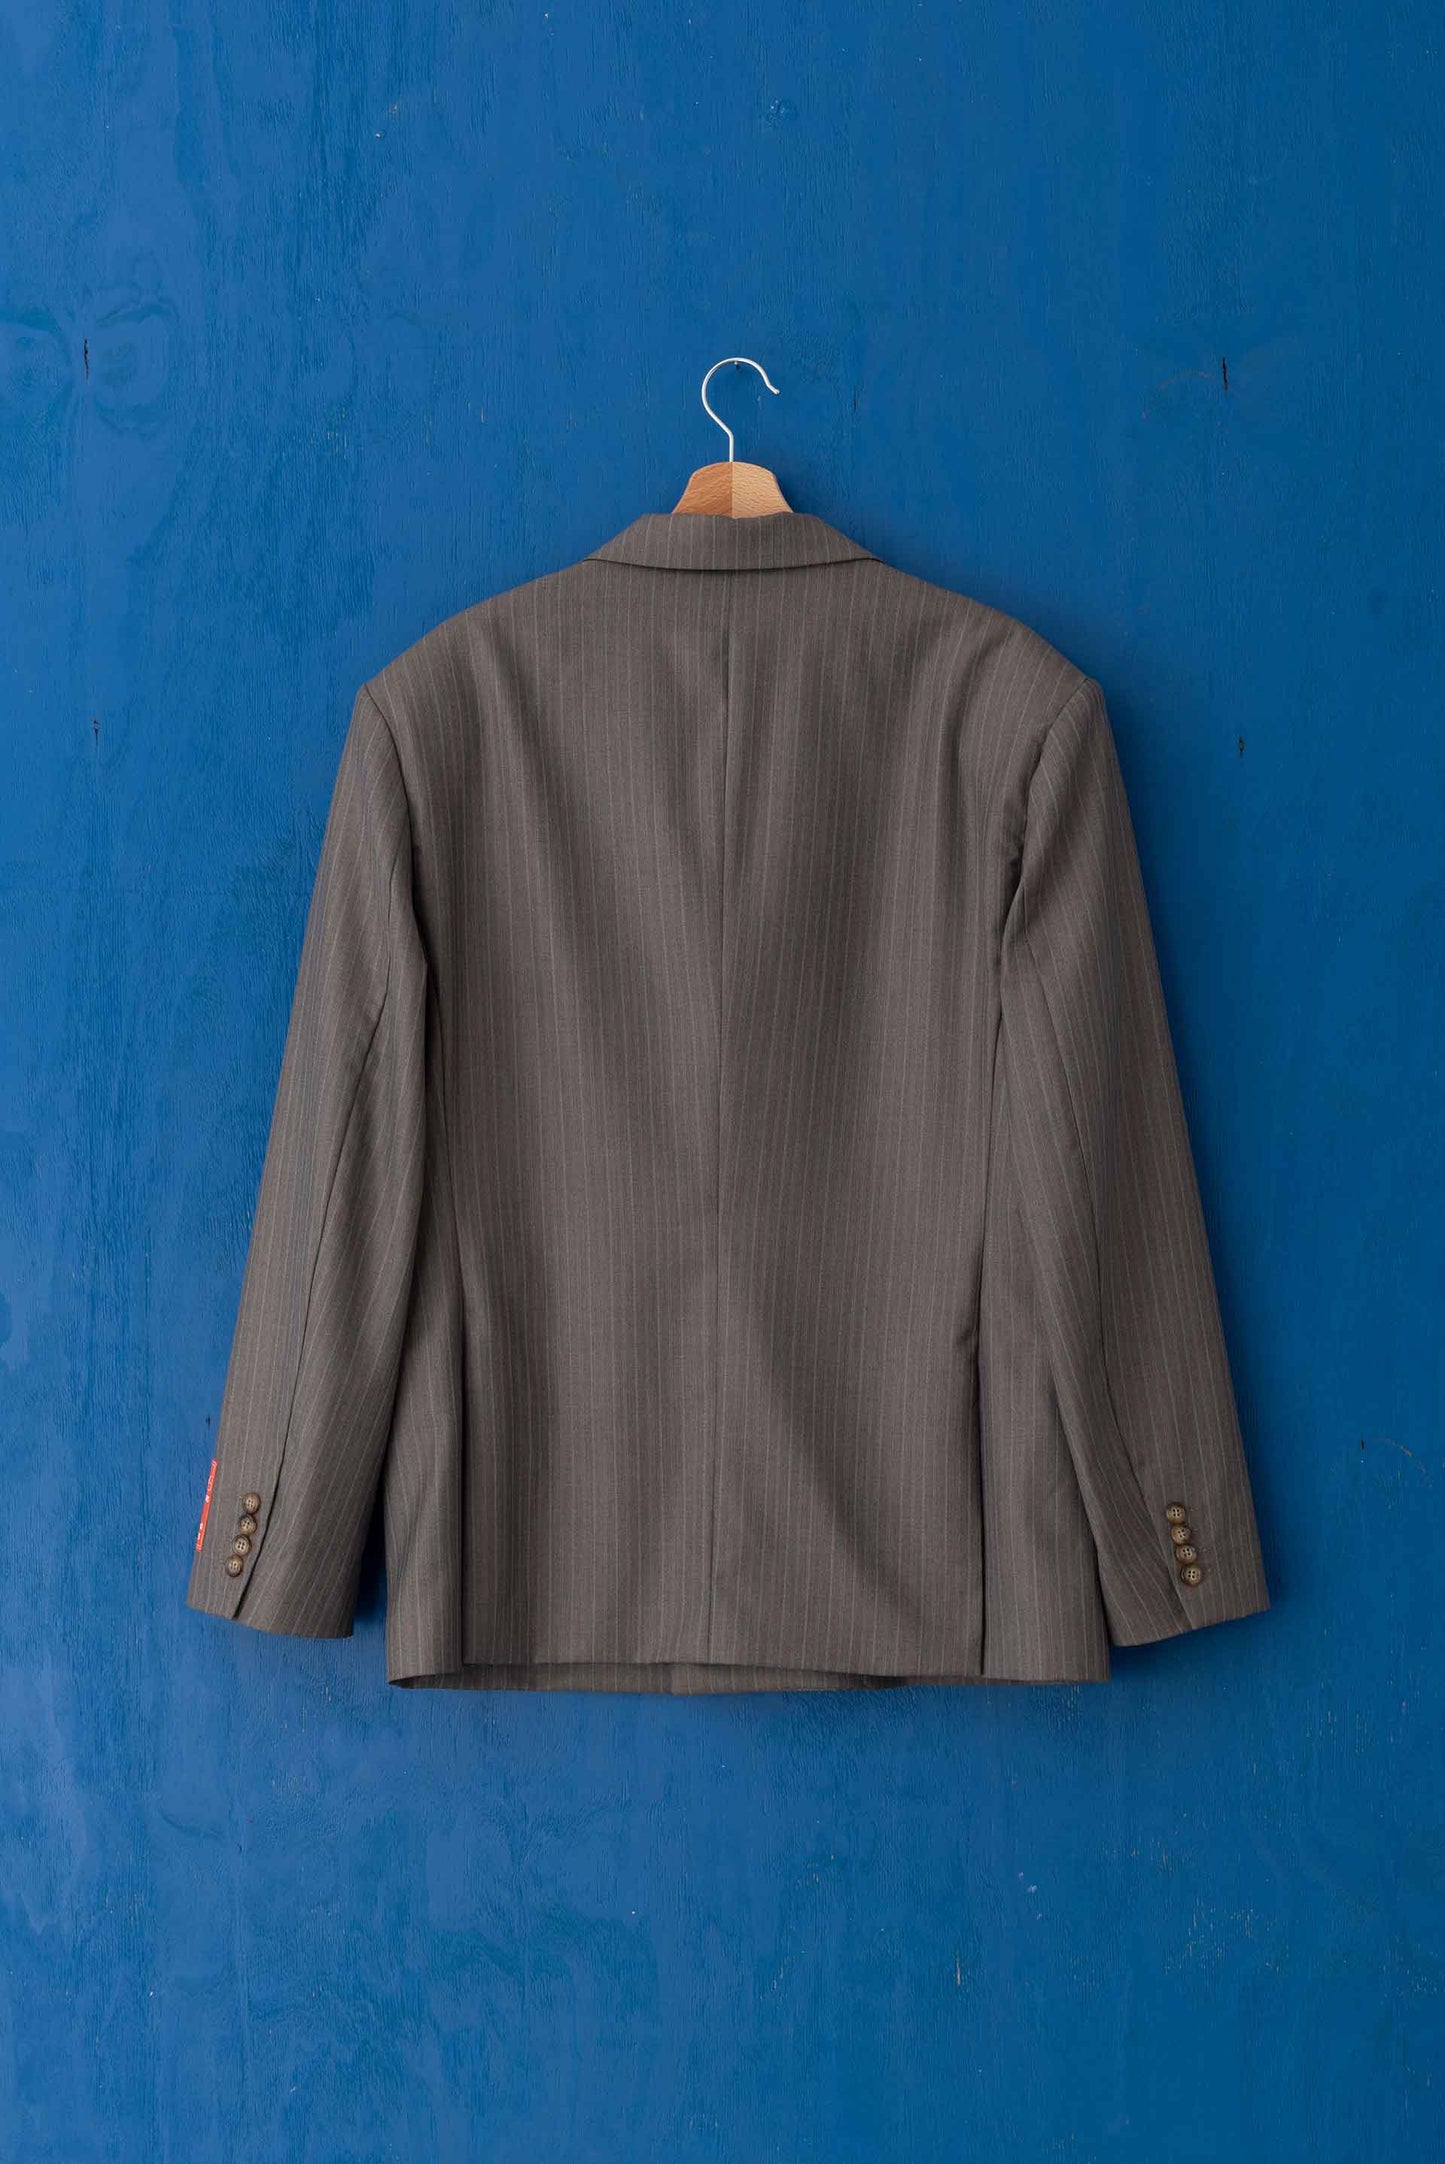 Wool Double-Breasted Jacket